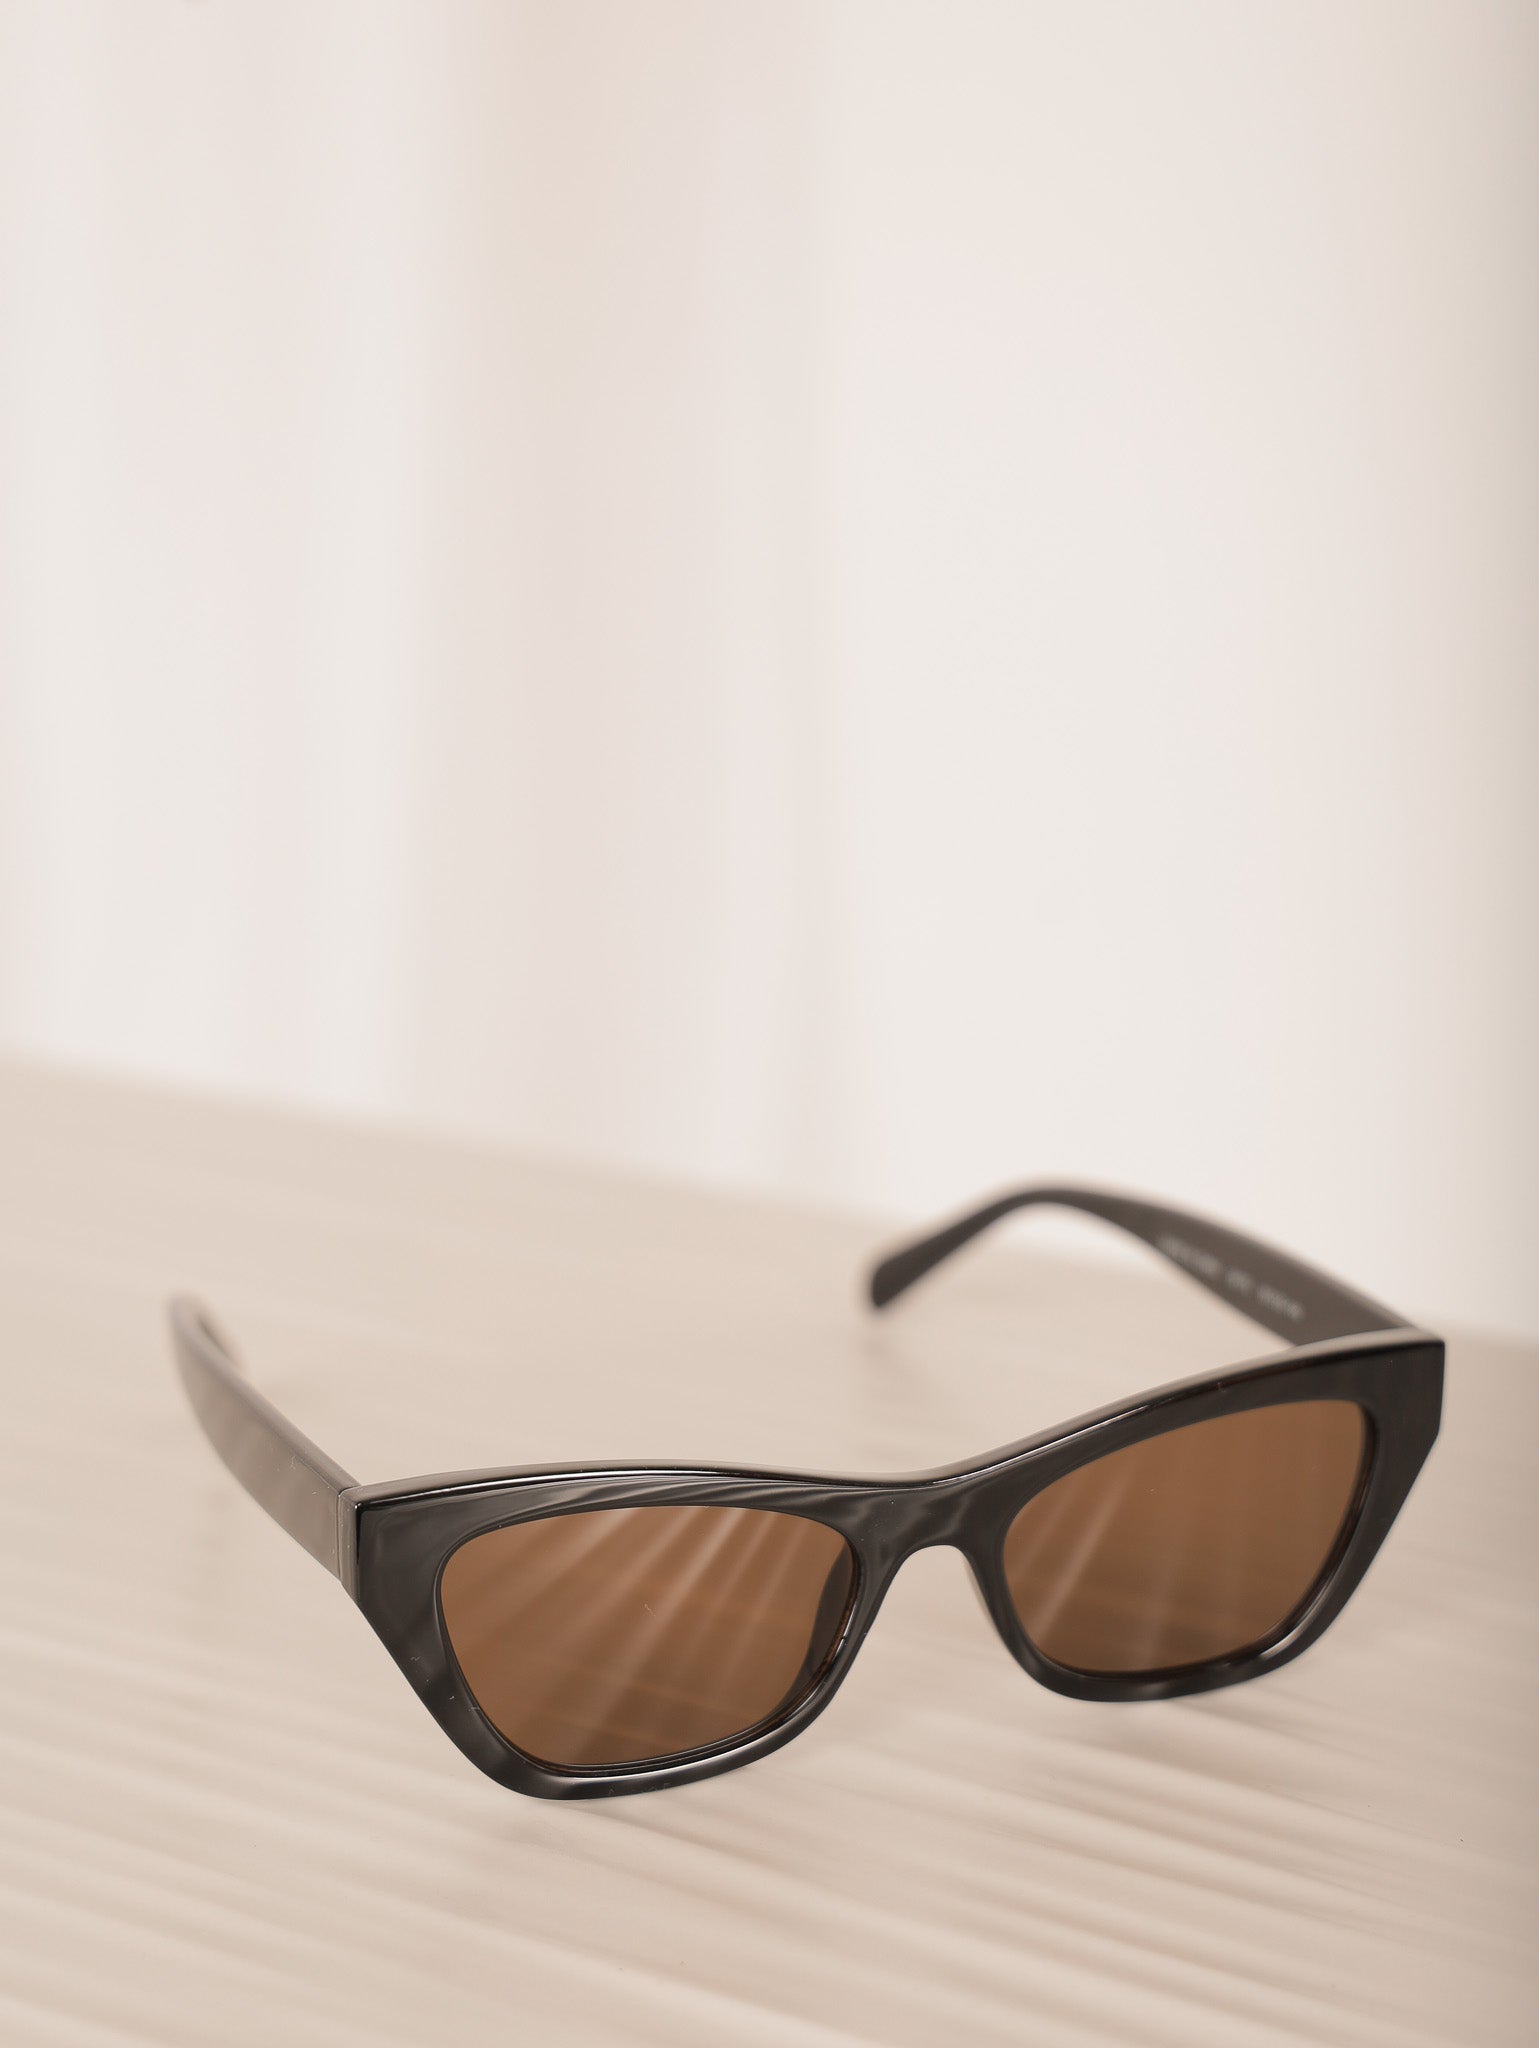 Molly Green - Myrtle Sunnies - Accessories